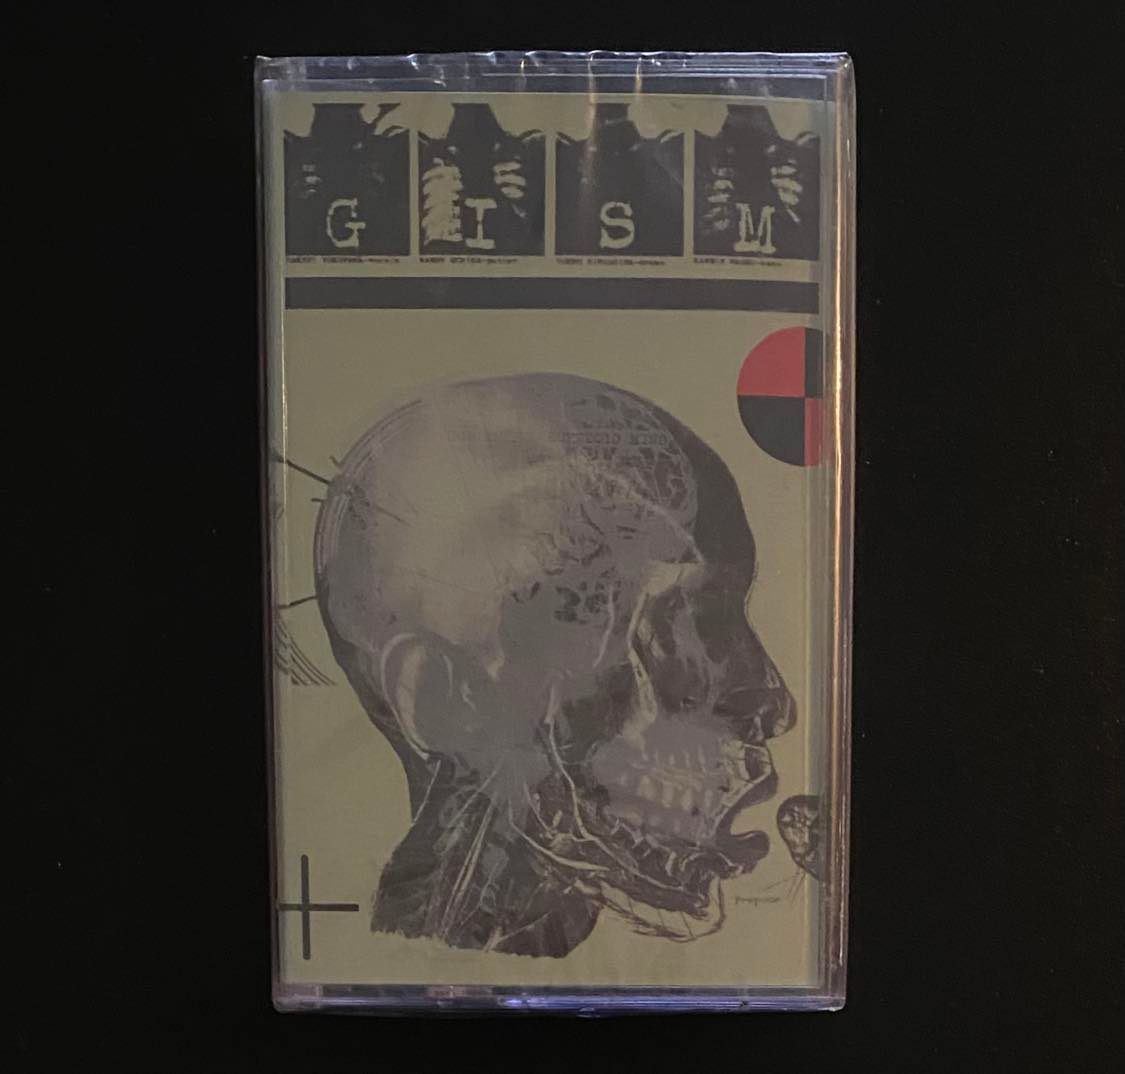 GISM – Military Affairs Neurotic Cassette